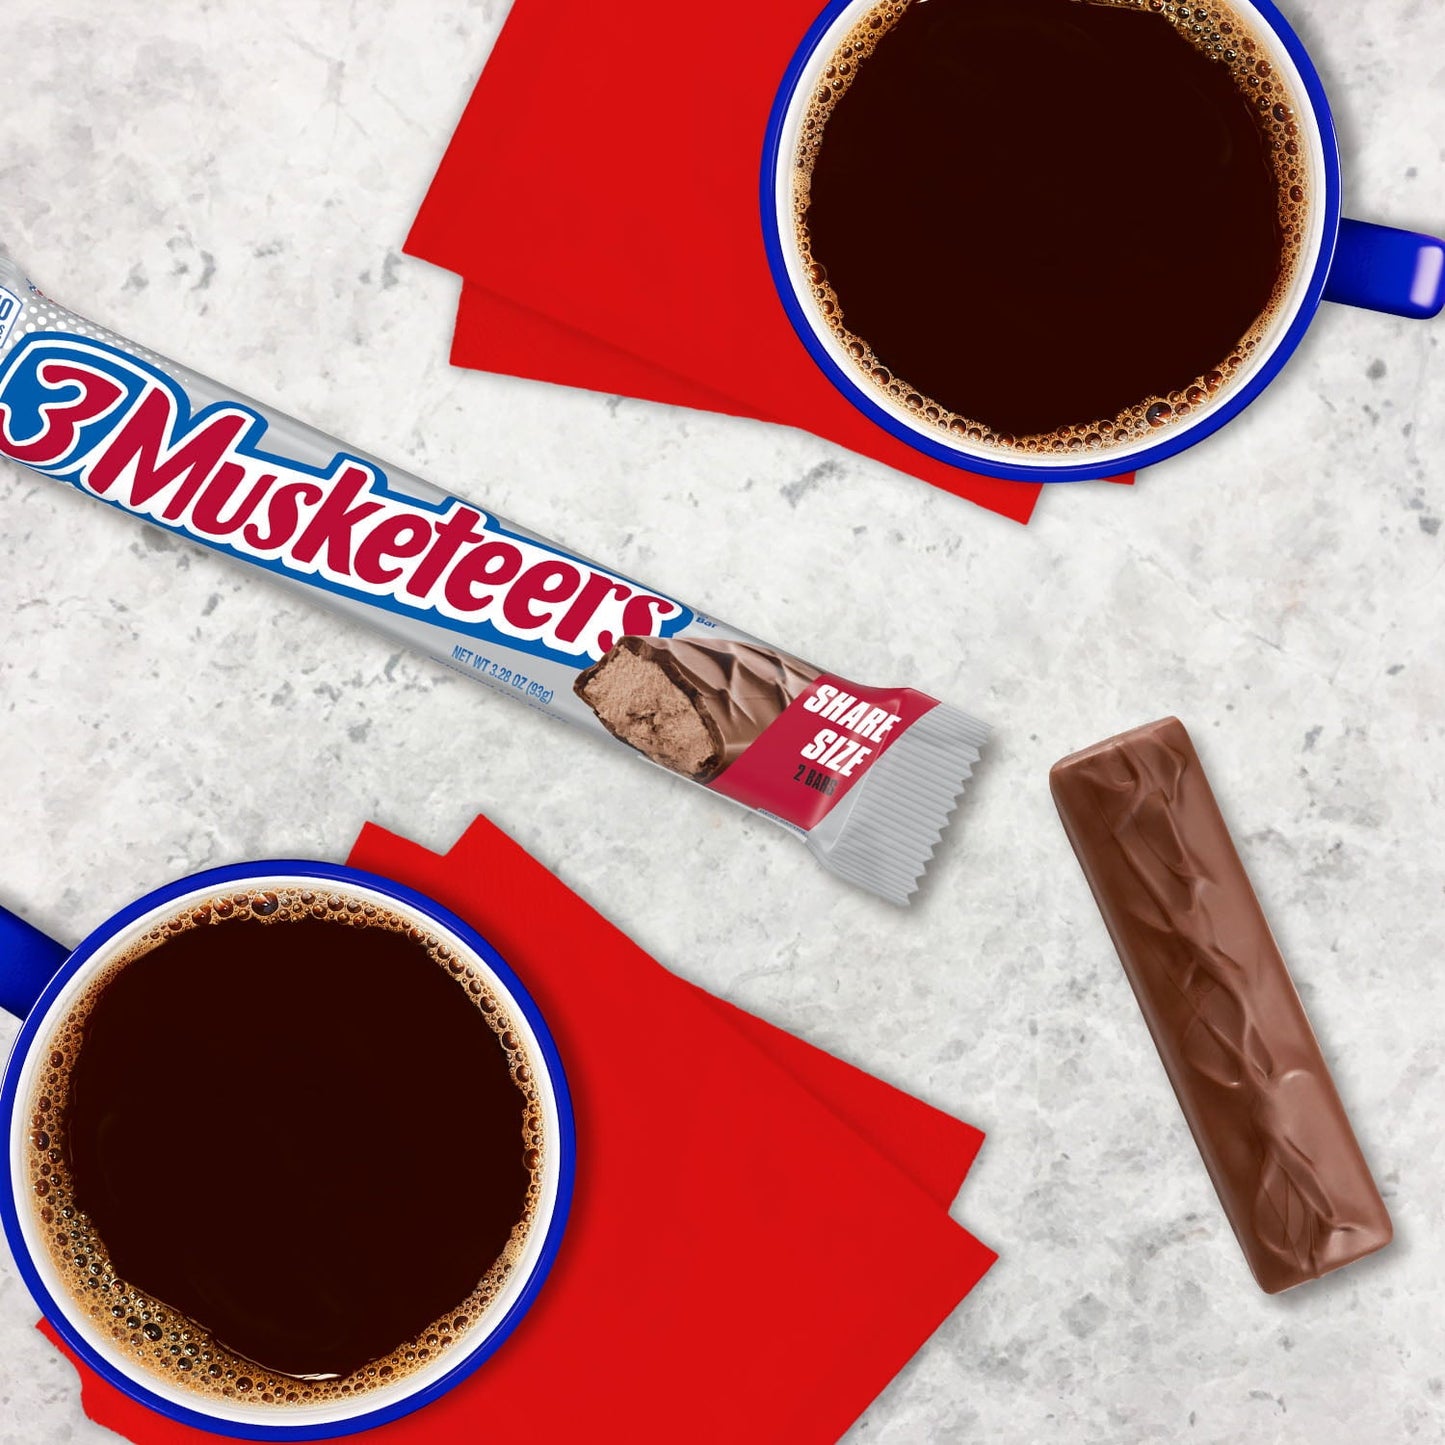 3 Musketeers Milk Chocolate Candy Bar, Sharing Size - 3.28 oz